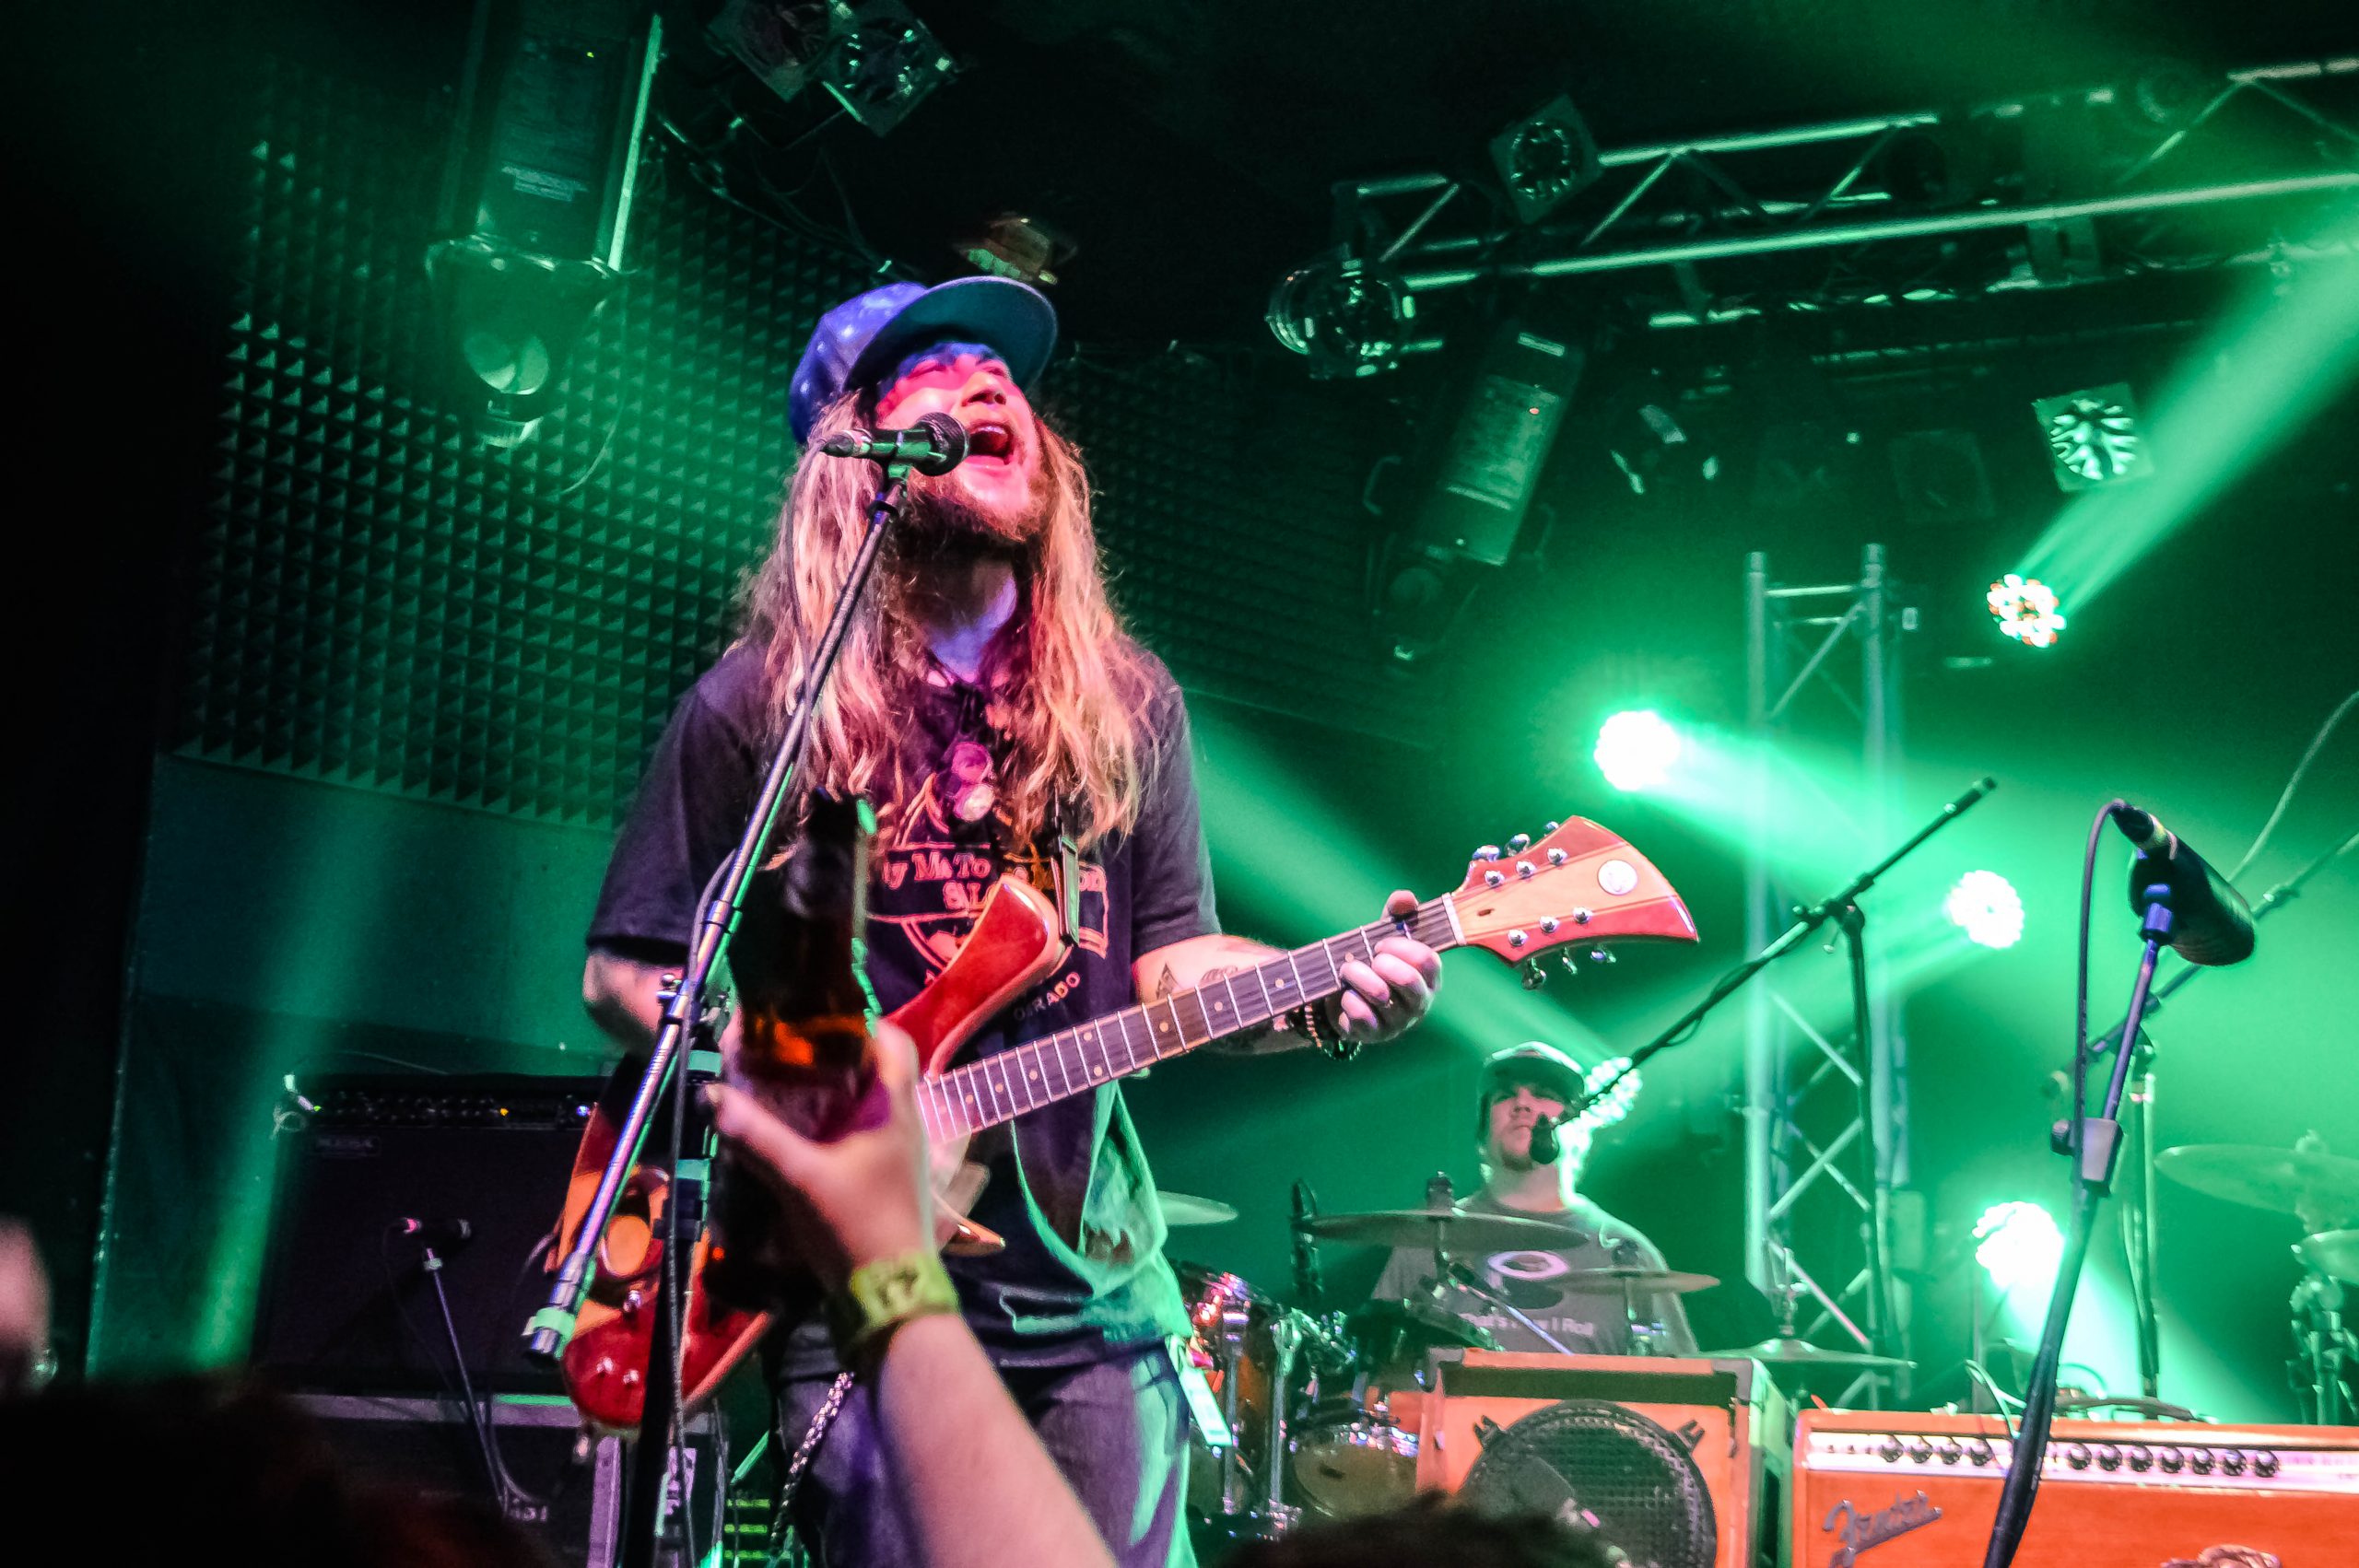 Twiddle and Kung FU @ Rex Theater, Pittsburgh PA: Show Review and Gallery